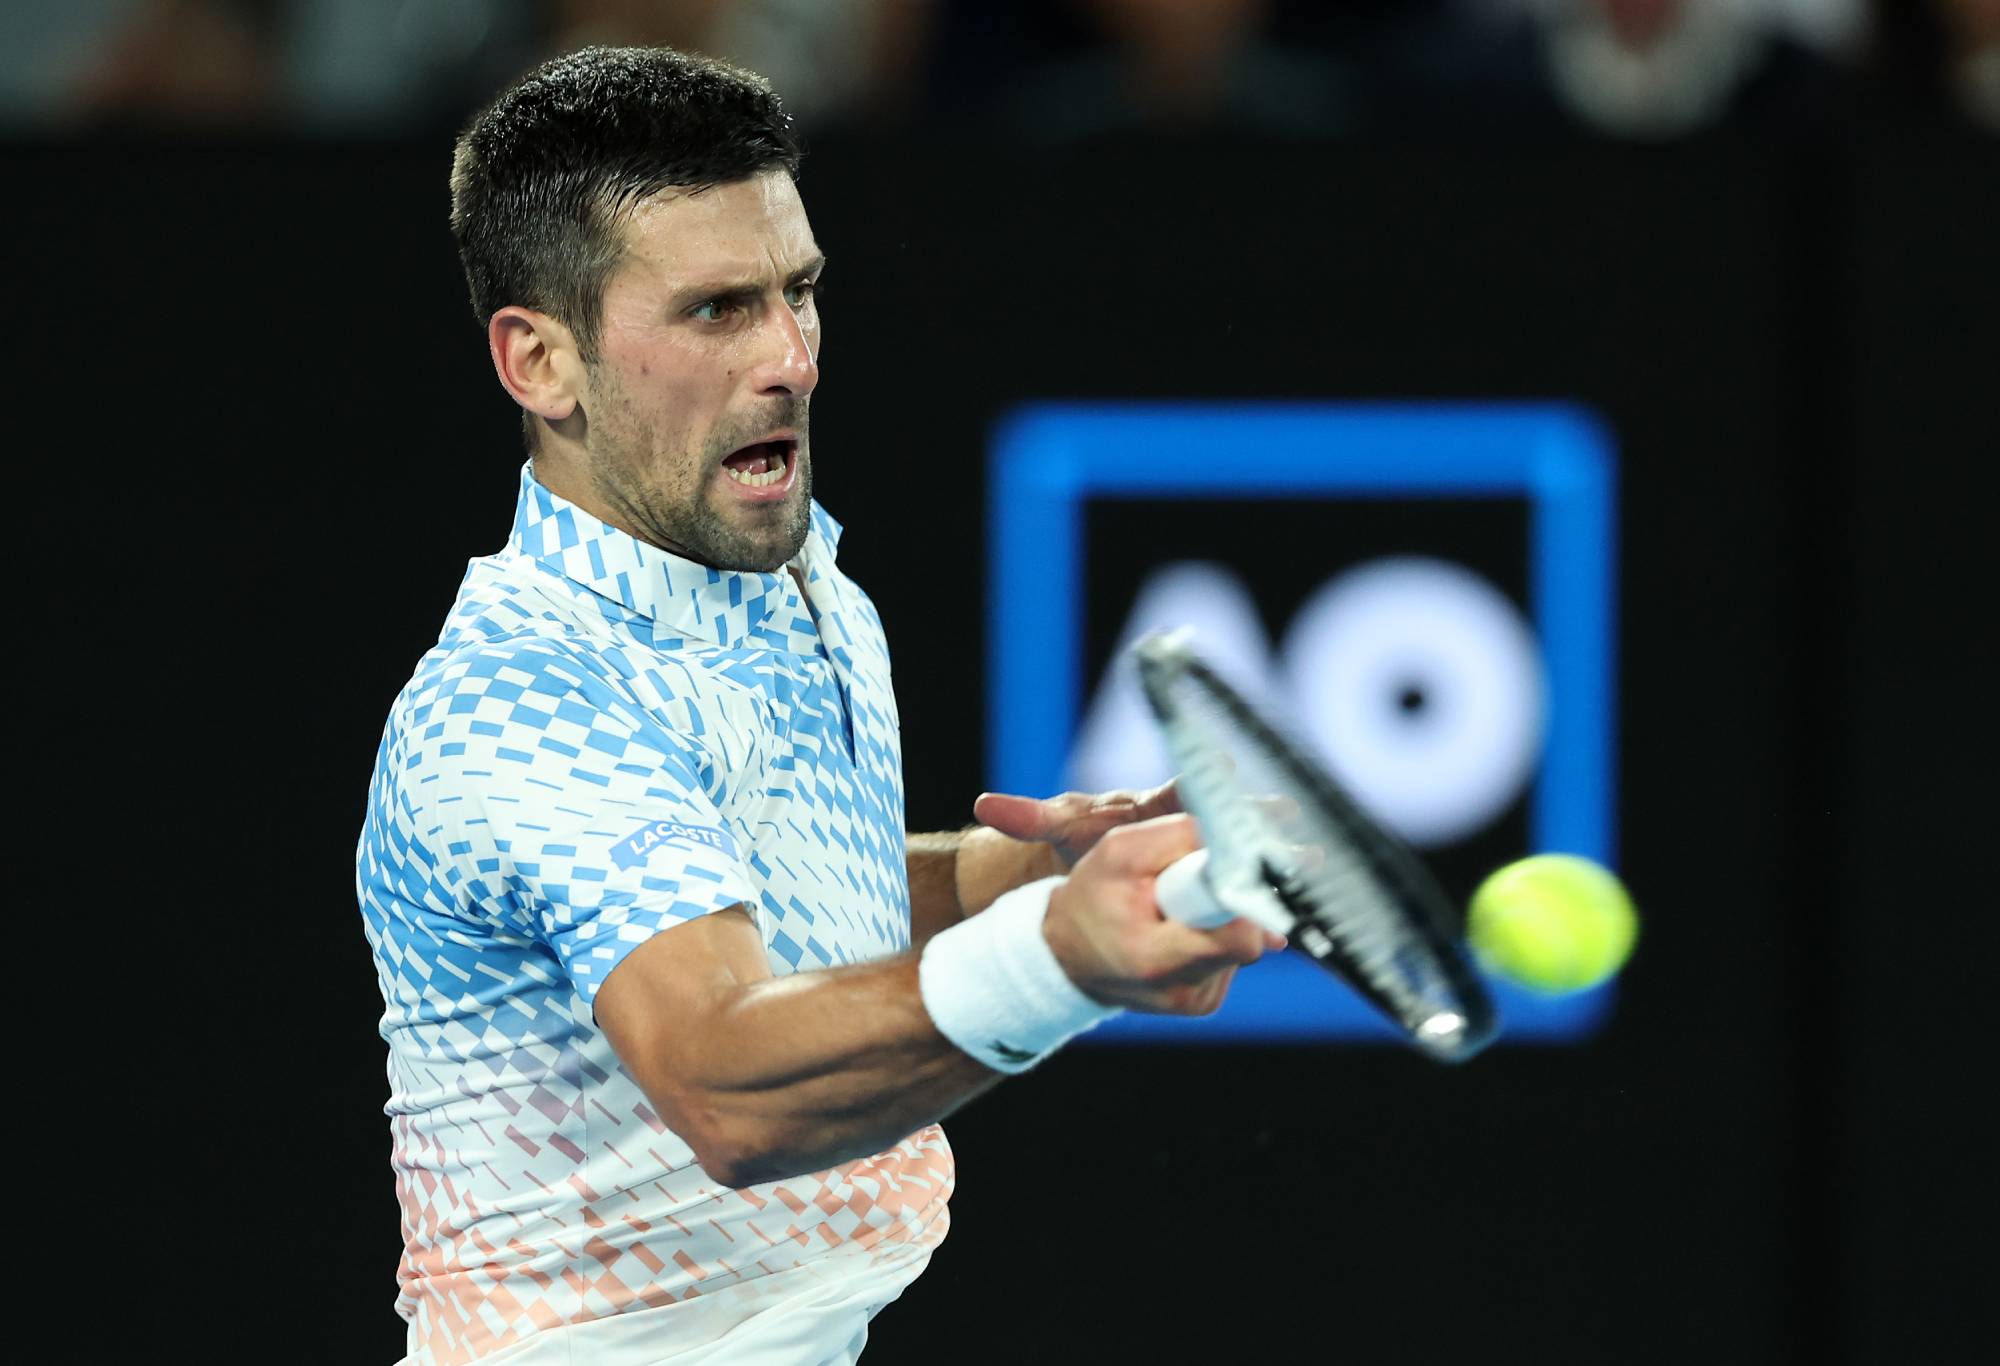 From kicked out to champion: Djokovic blitzes Tsitsipas for TENTH Australian Open title a year after being deported